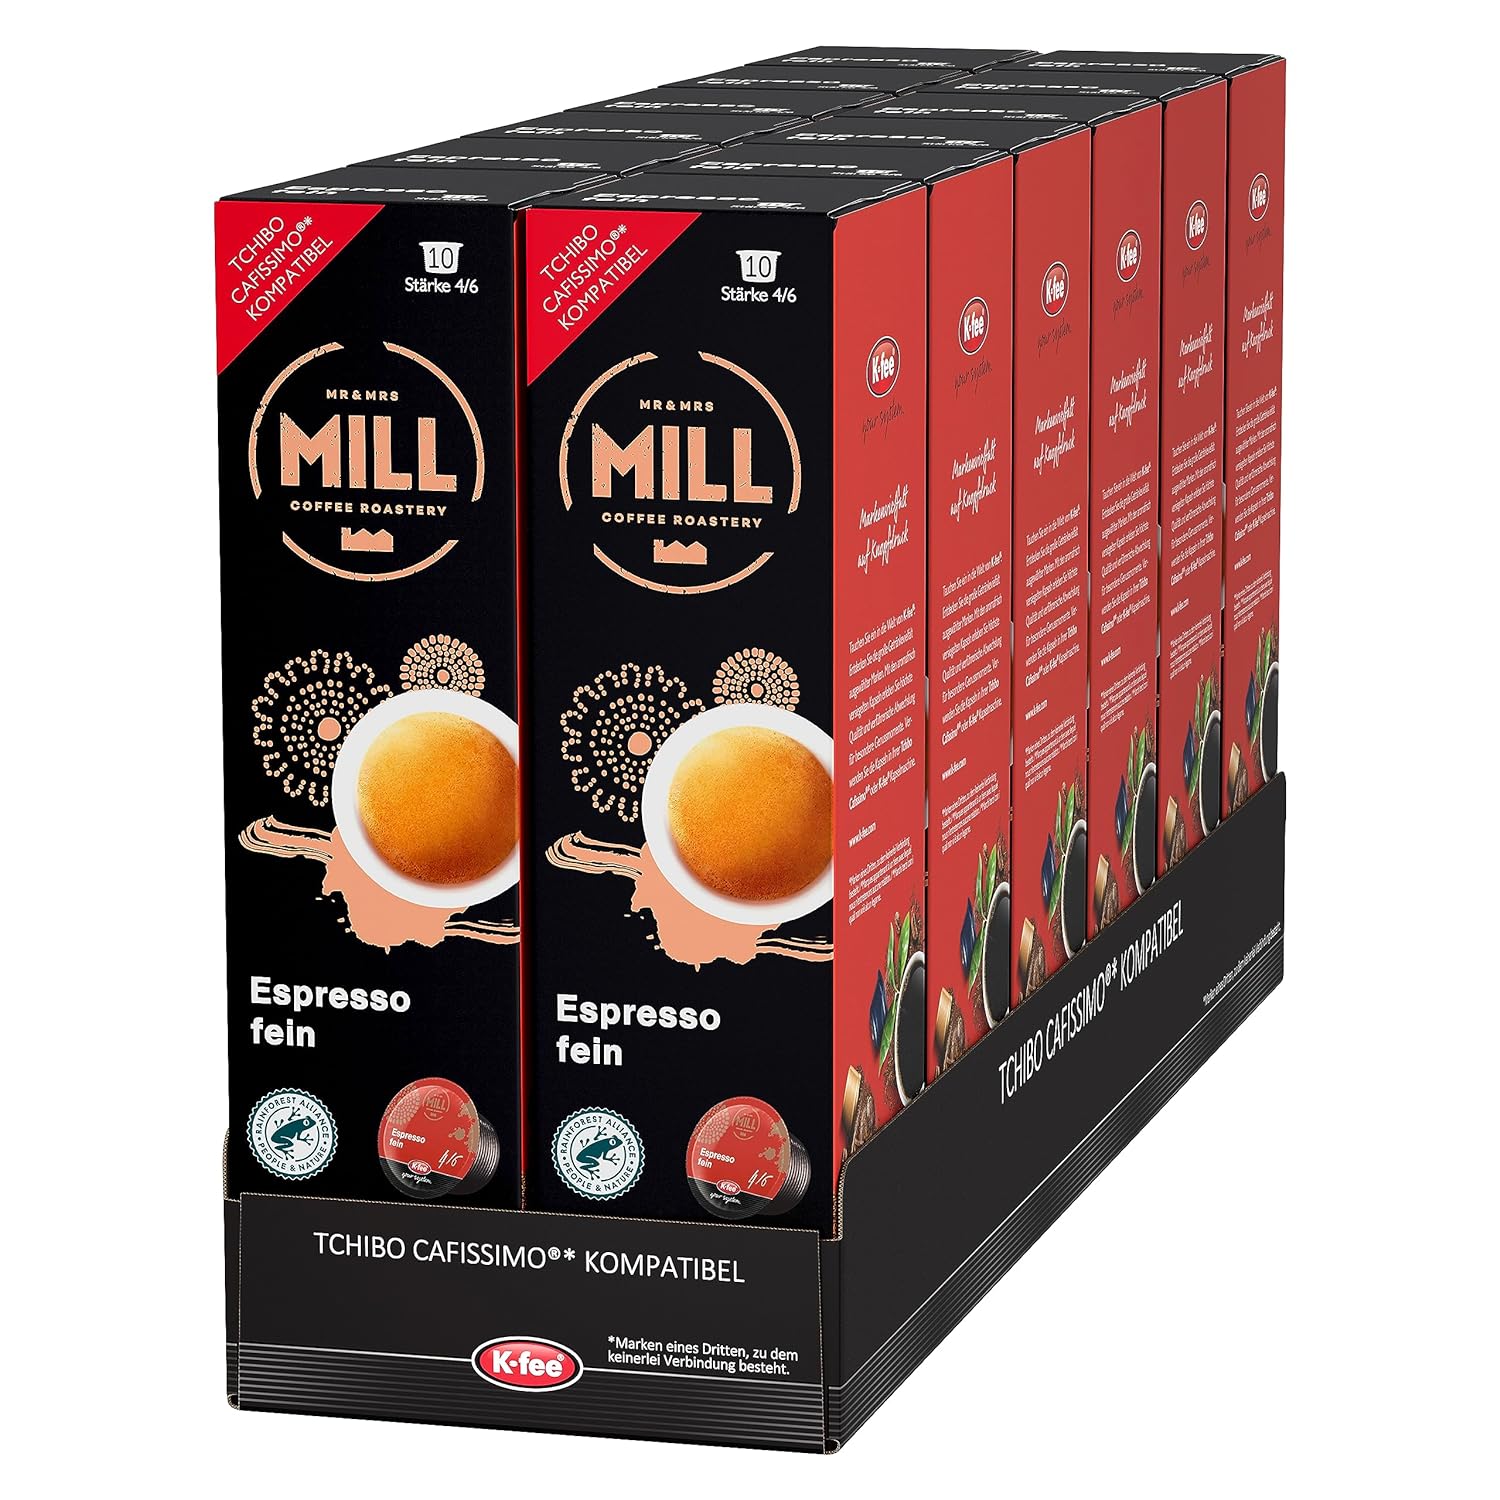 Mr & Mrs Mill Espresso Fine Coffee Capsules, Strength 4/6, Compatible with K-fee & Tchibo Cafissimo*, Rainforest Alliance Certified, 120 Capsules (12 x 10)